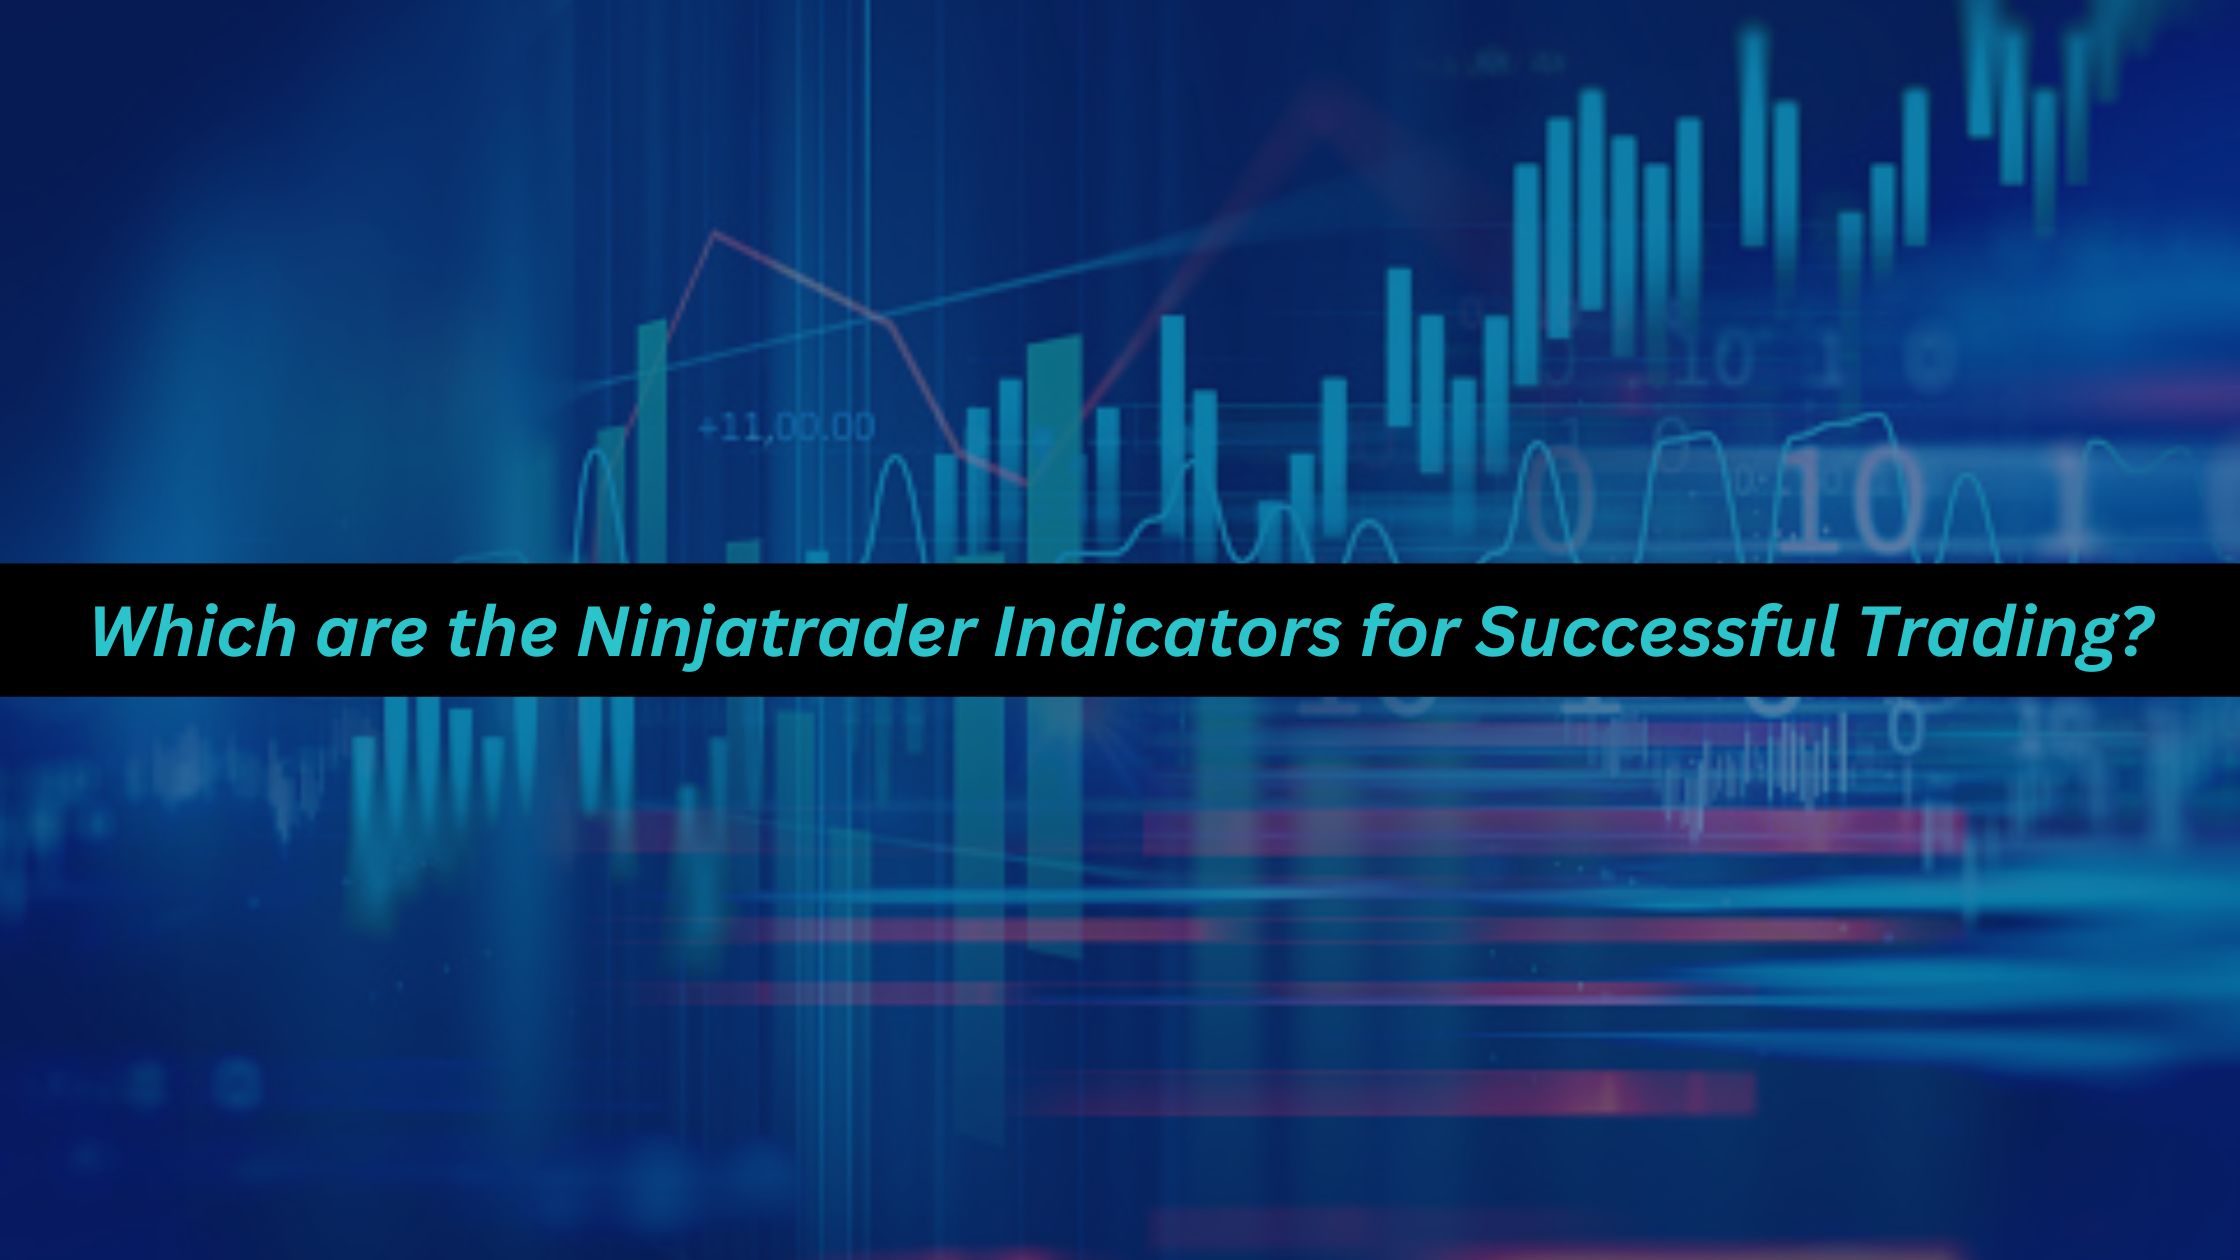 Which are the Ninjatrader Indicators for Successful Trading?